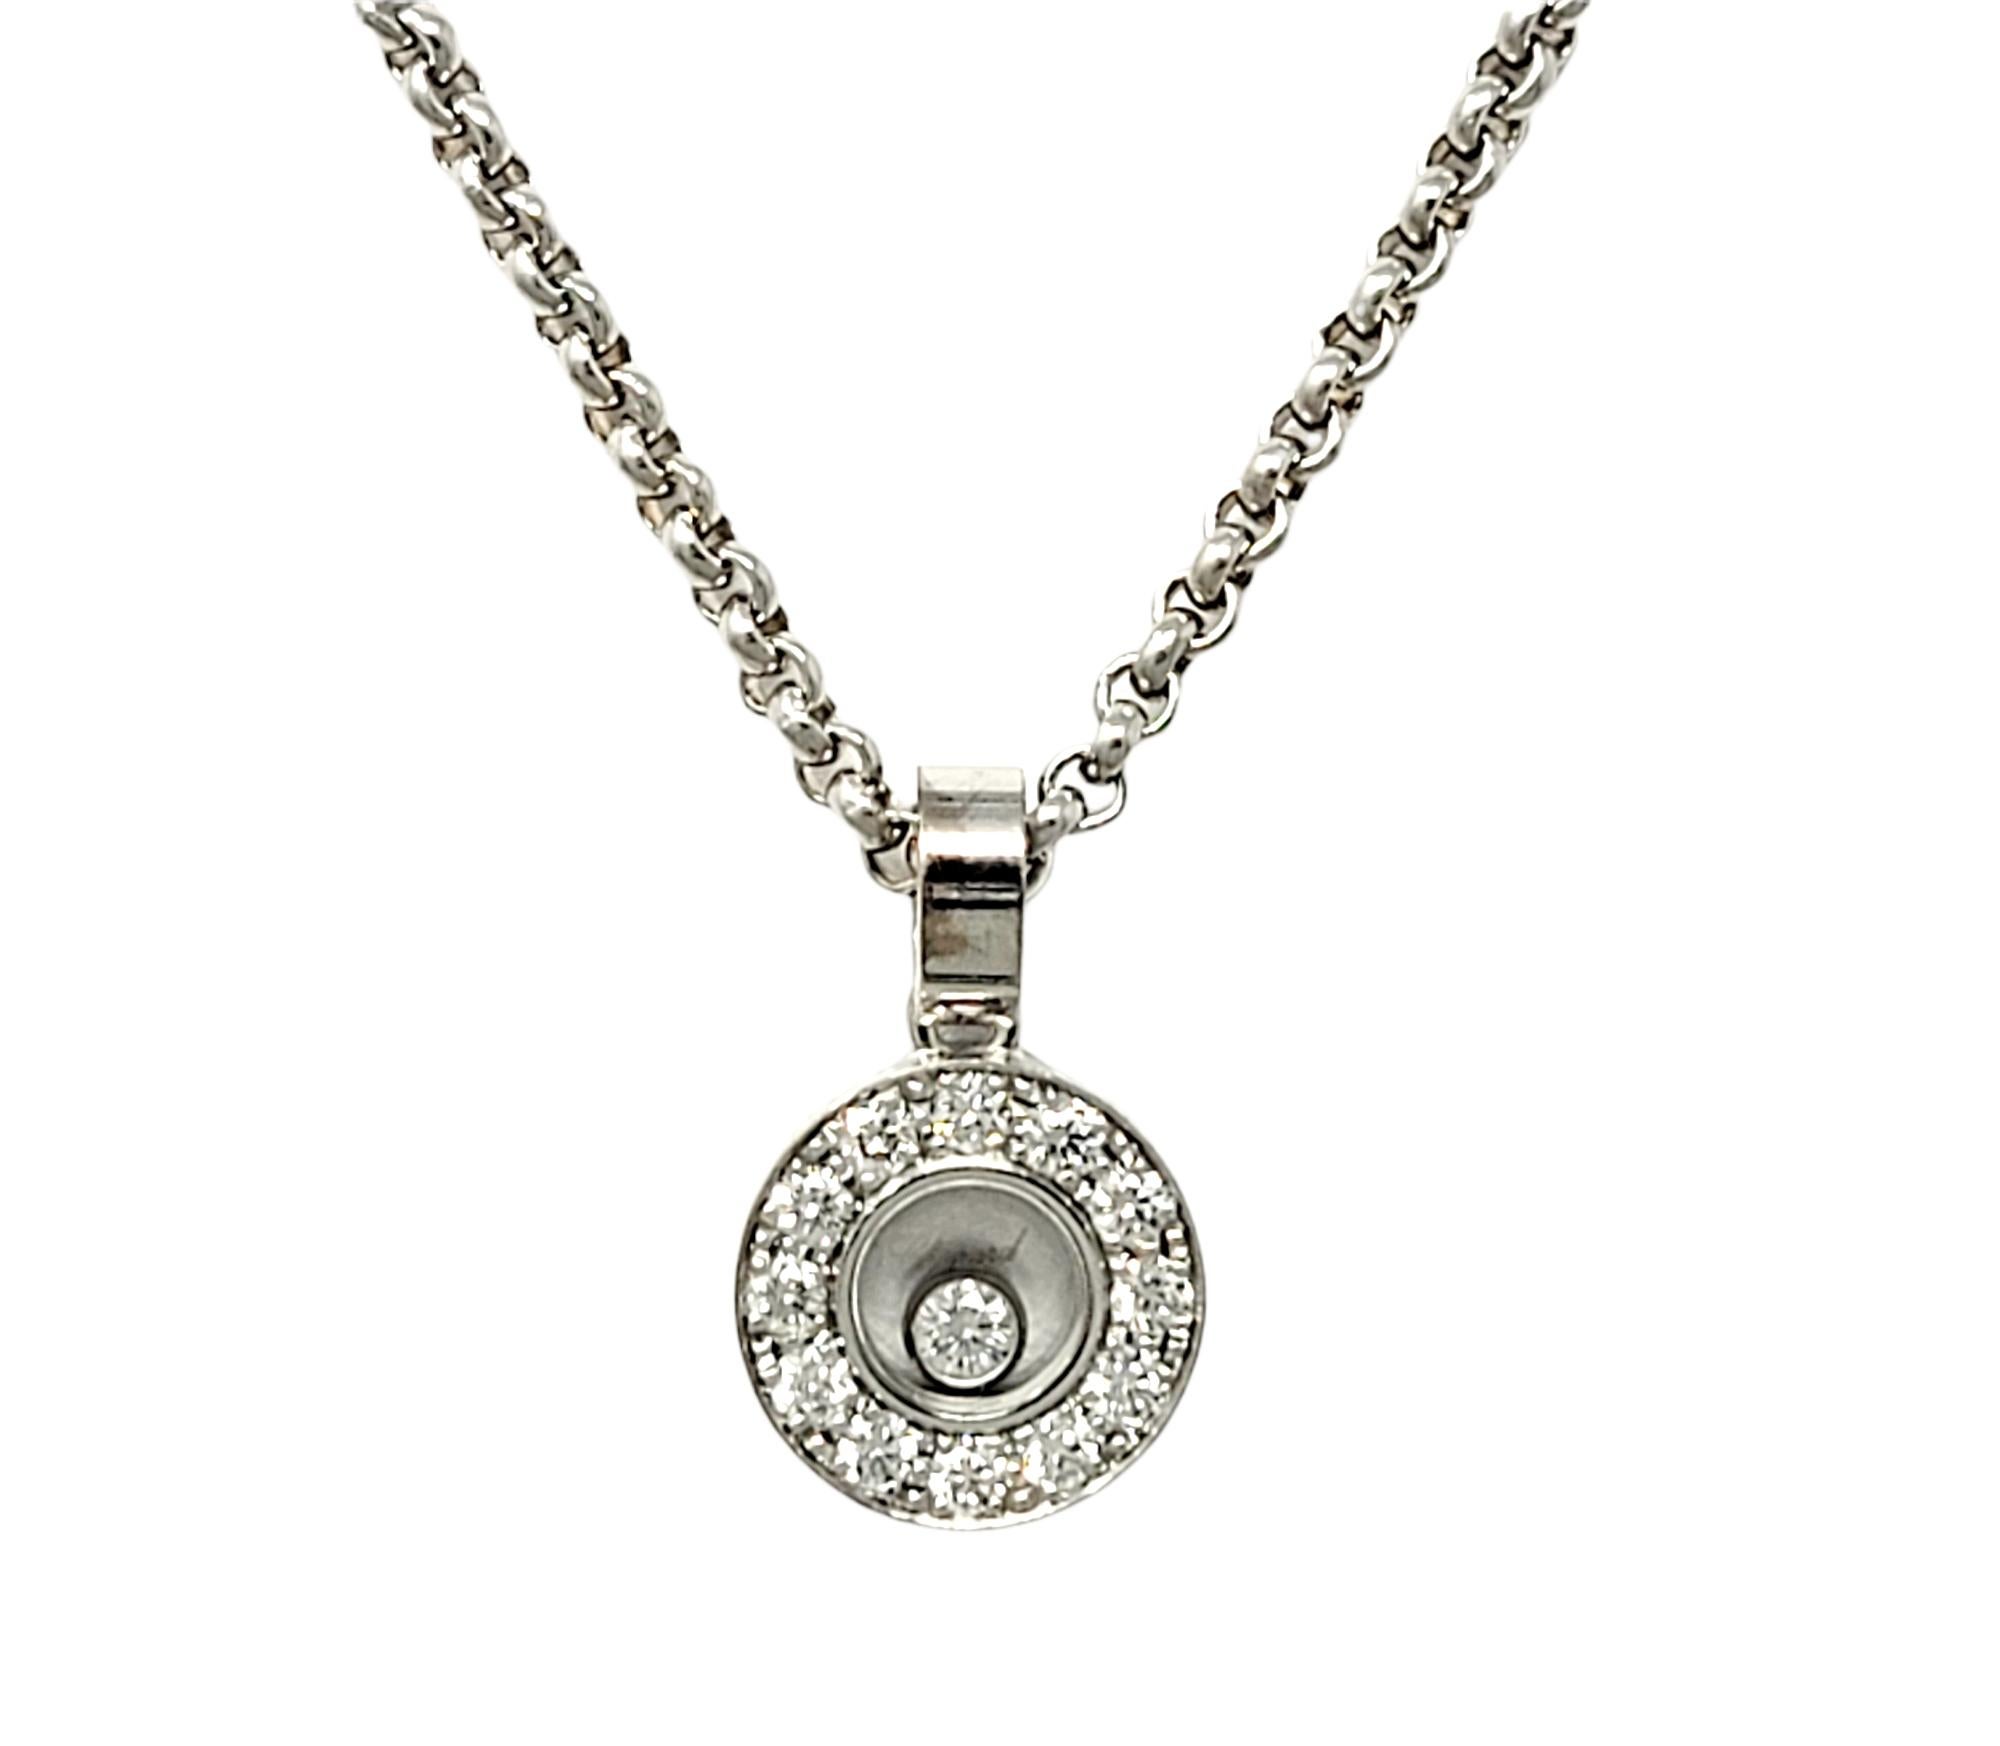 Contemporary Chopard Happy Diamonds Round Pave Halo Pendant Necklace in 18 Karat White Gold